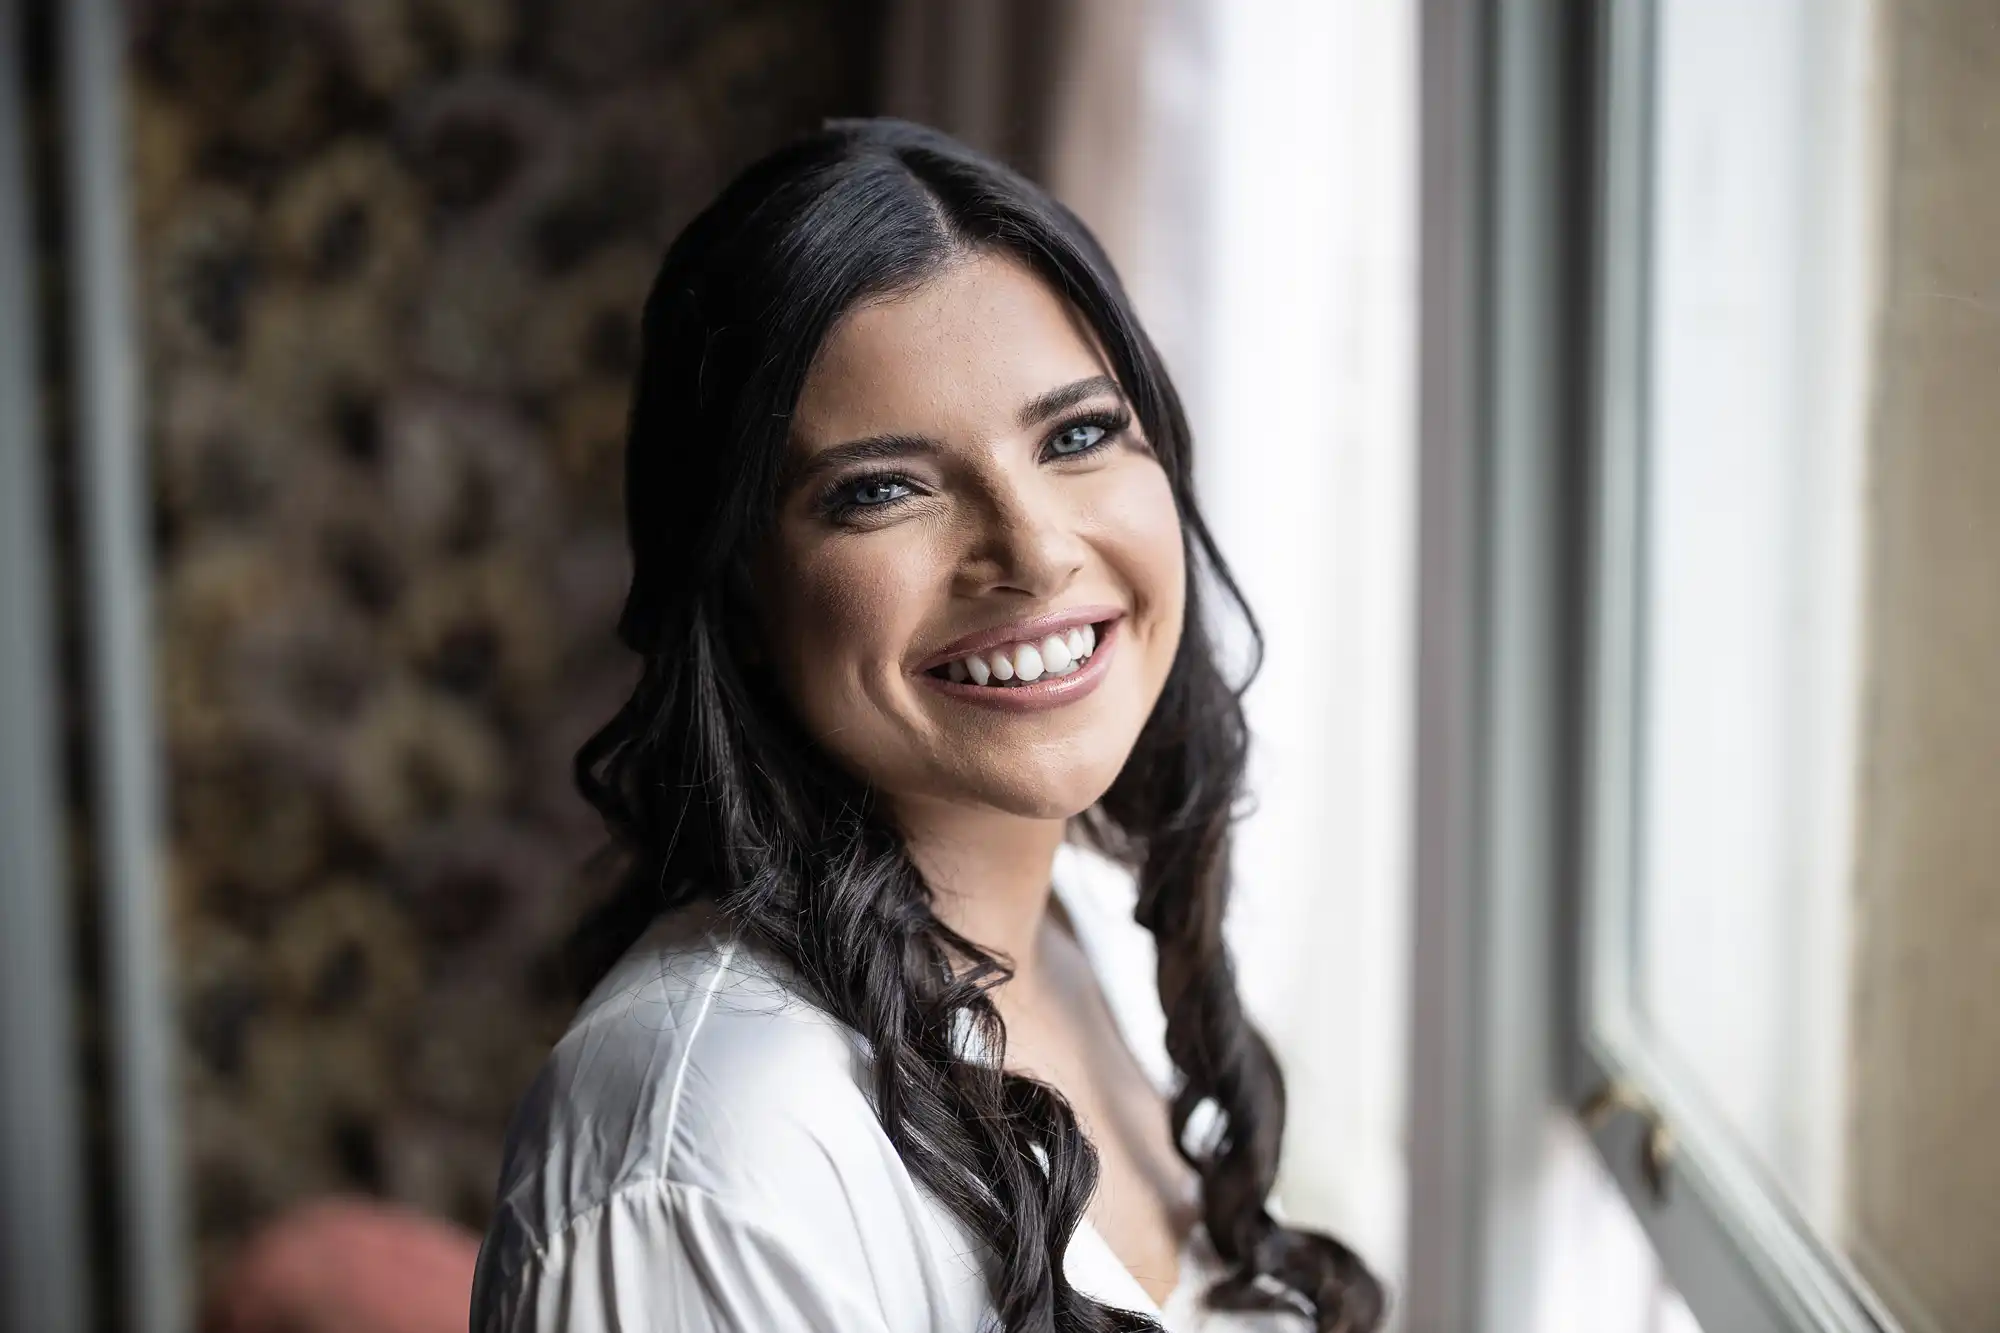 A smiling woman with long braided hair, wearing a white blouse, looks joyfully towards the camera by a window.